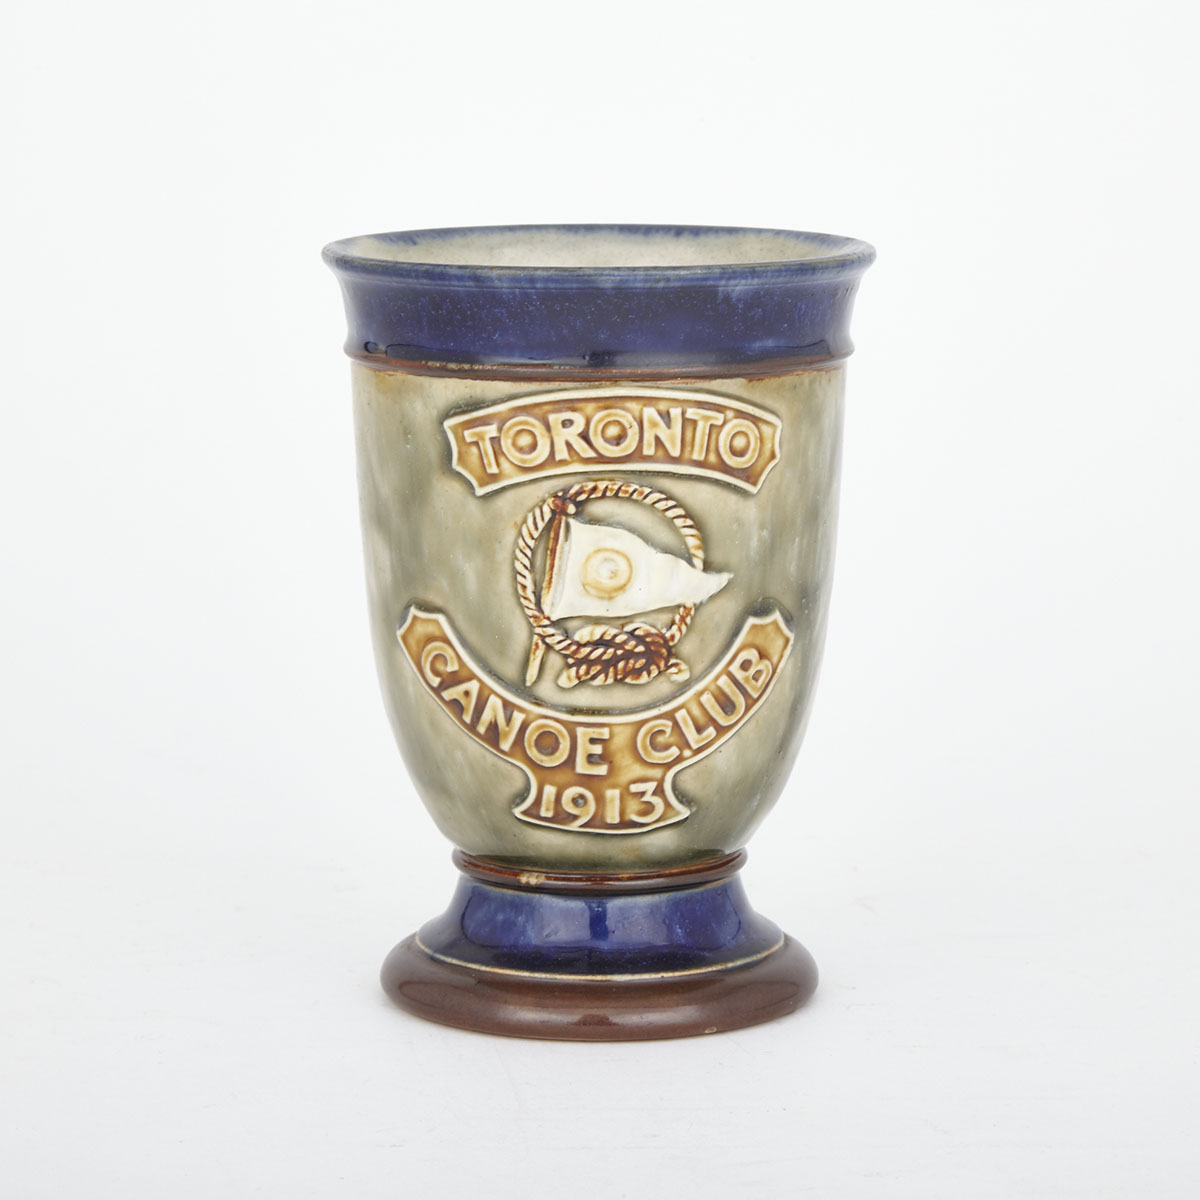 Royal Doulton Stoneware ‘Toronto Canoe Club’ Cup, dated 1913